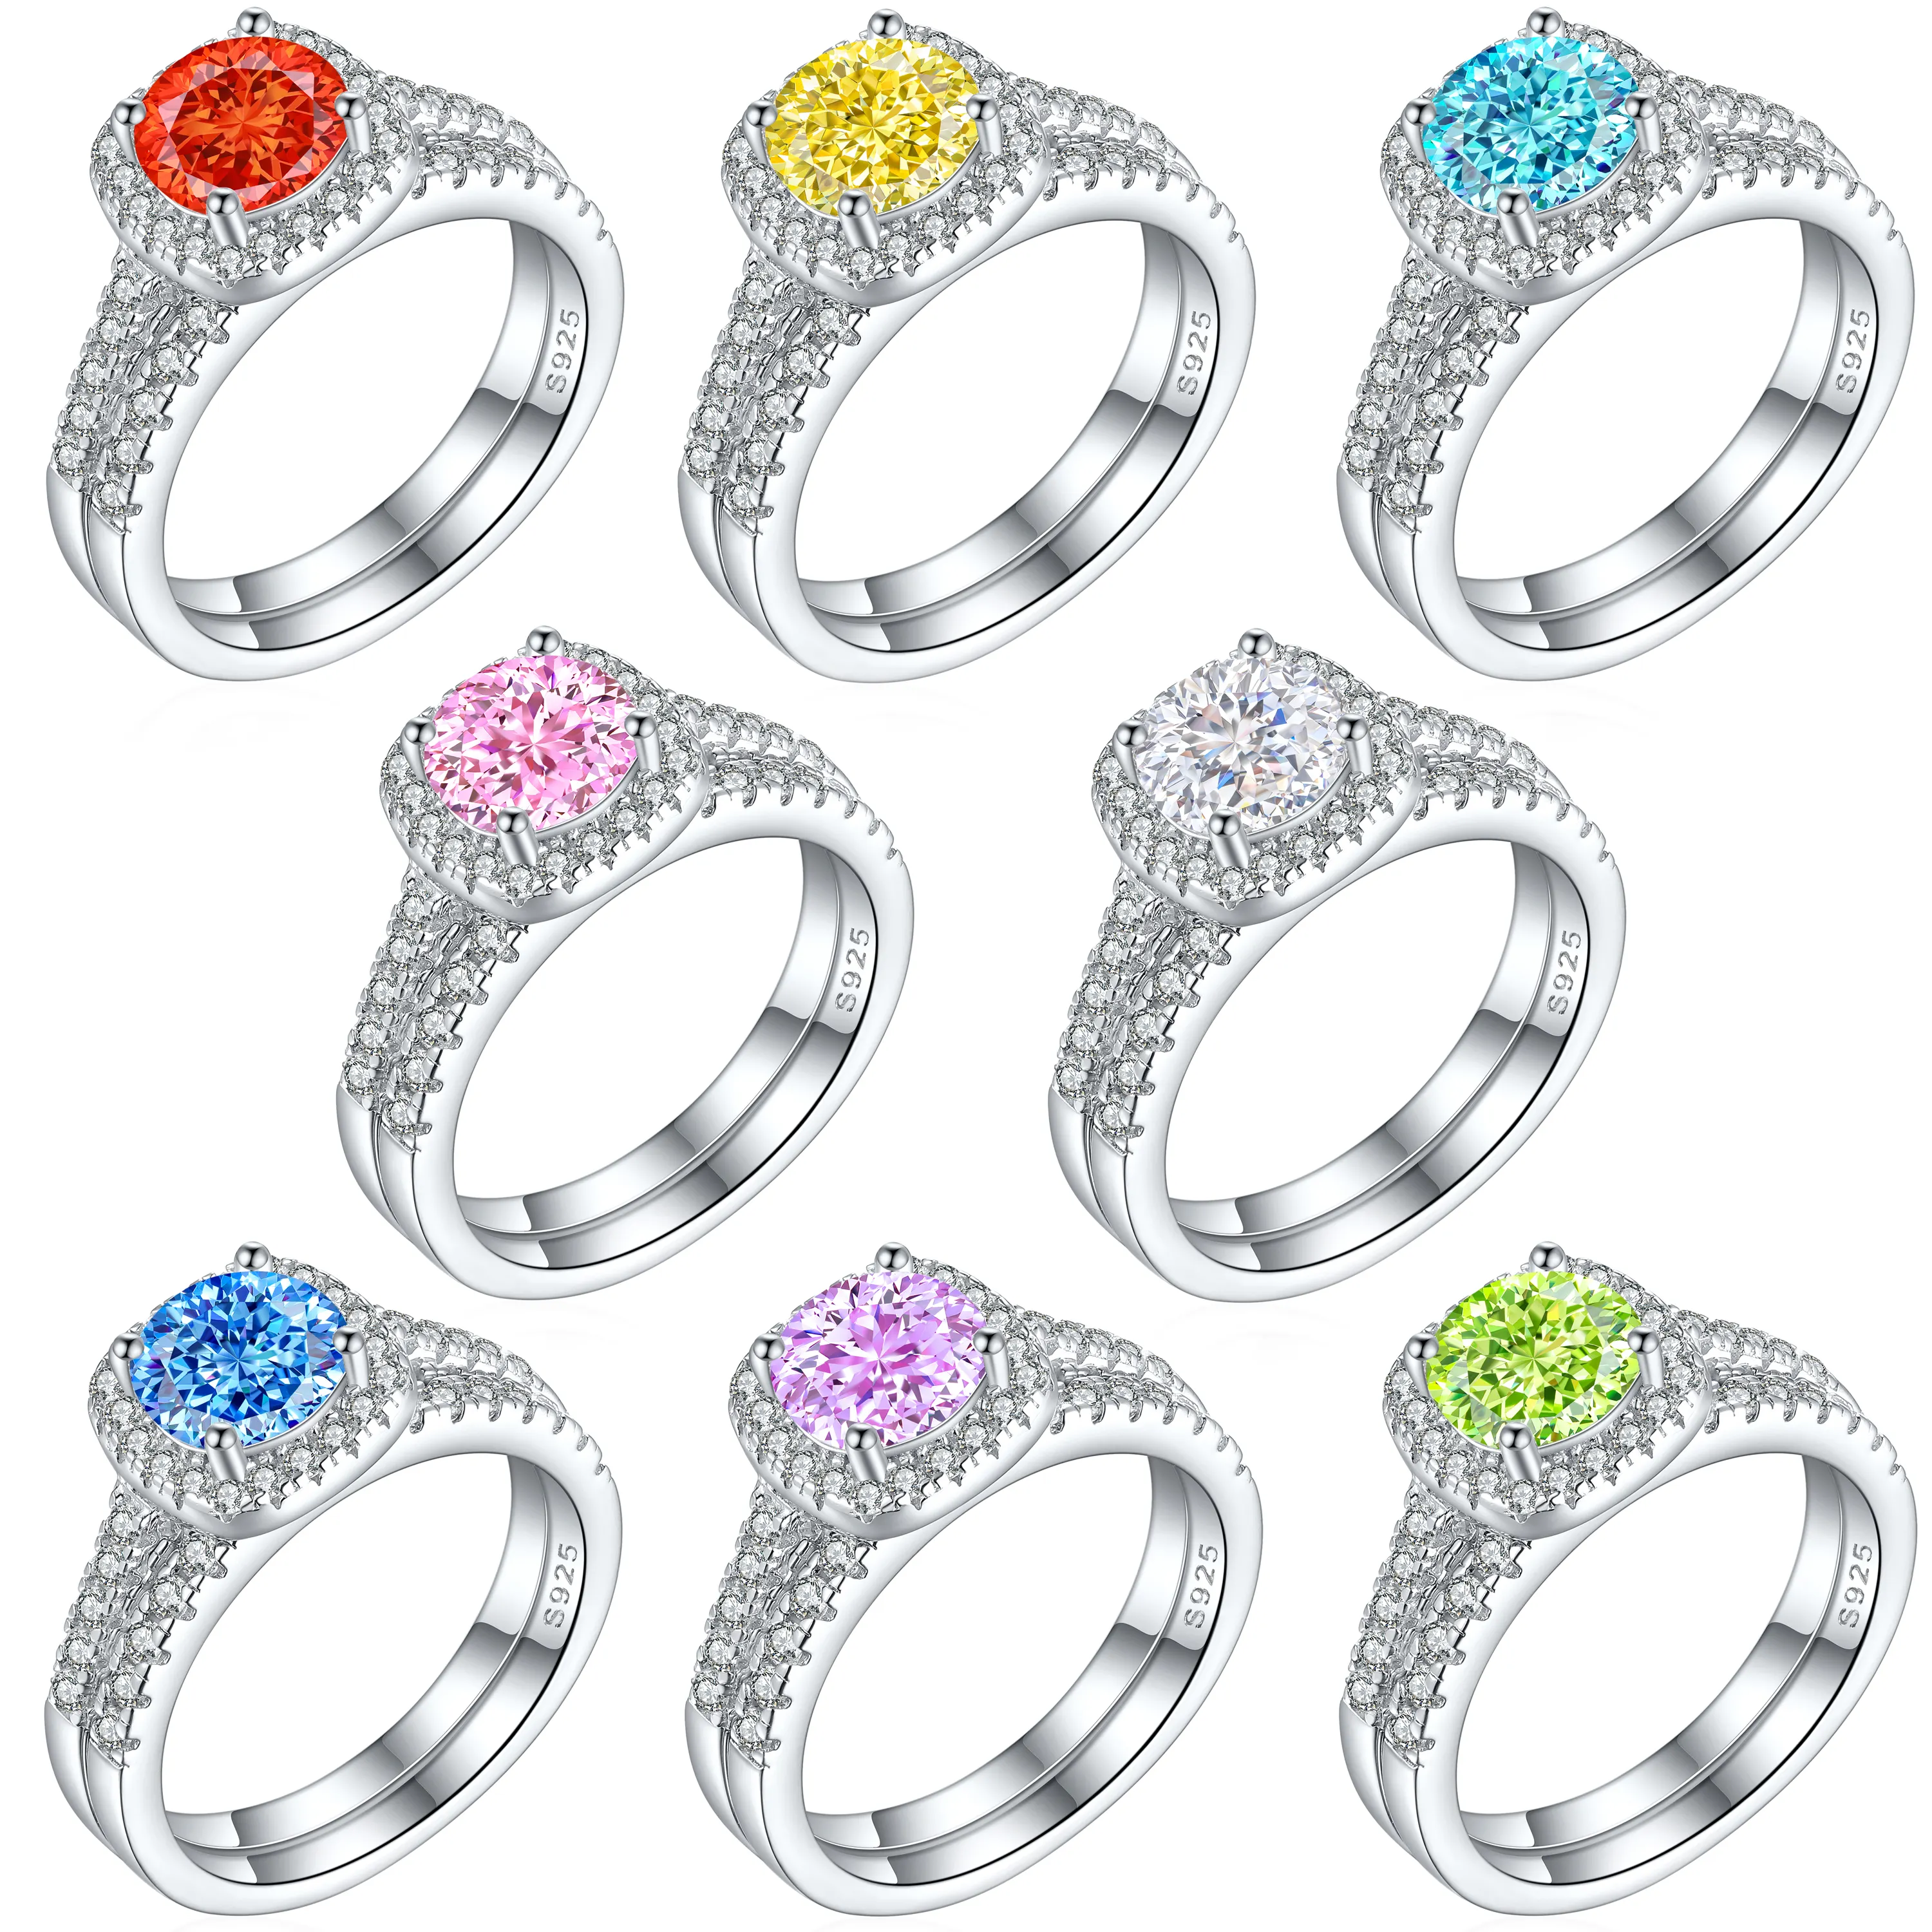 SKA Jewelry Sterling Silver 925 Ring European and American Fashion Flame Series Cushion Round Cut Zircon Set Ring